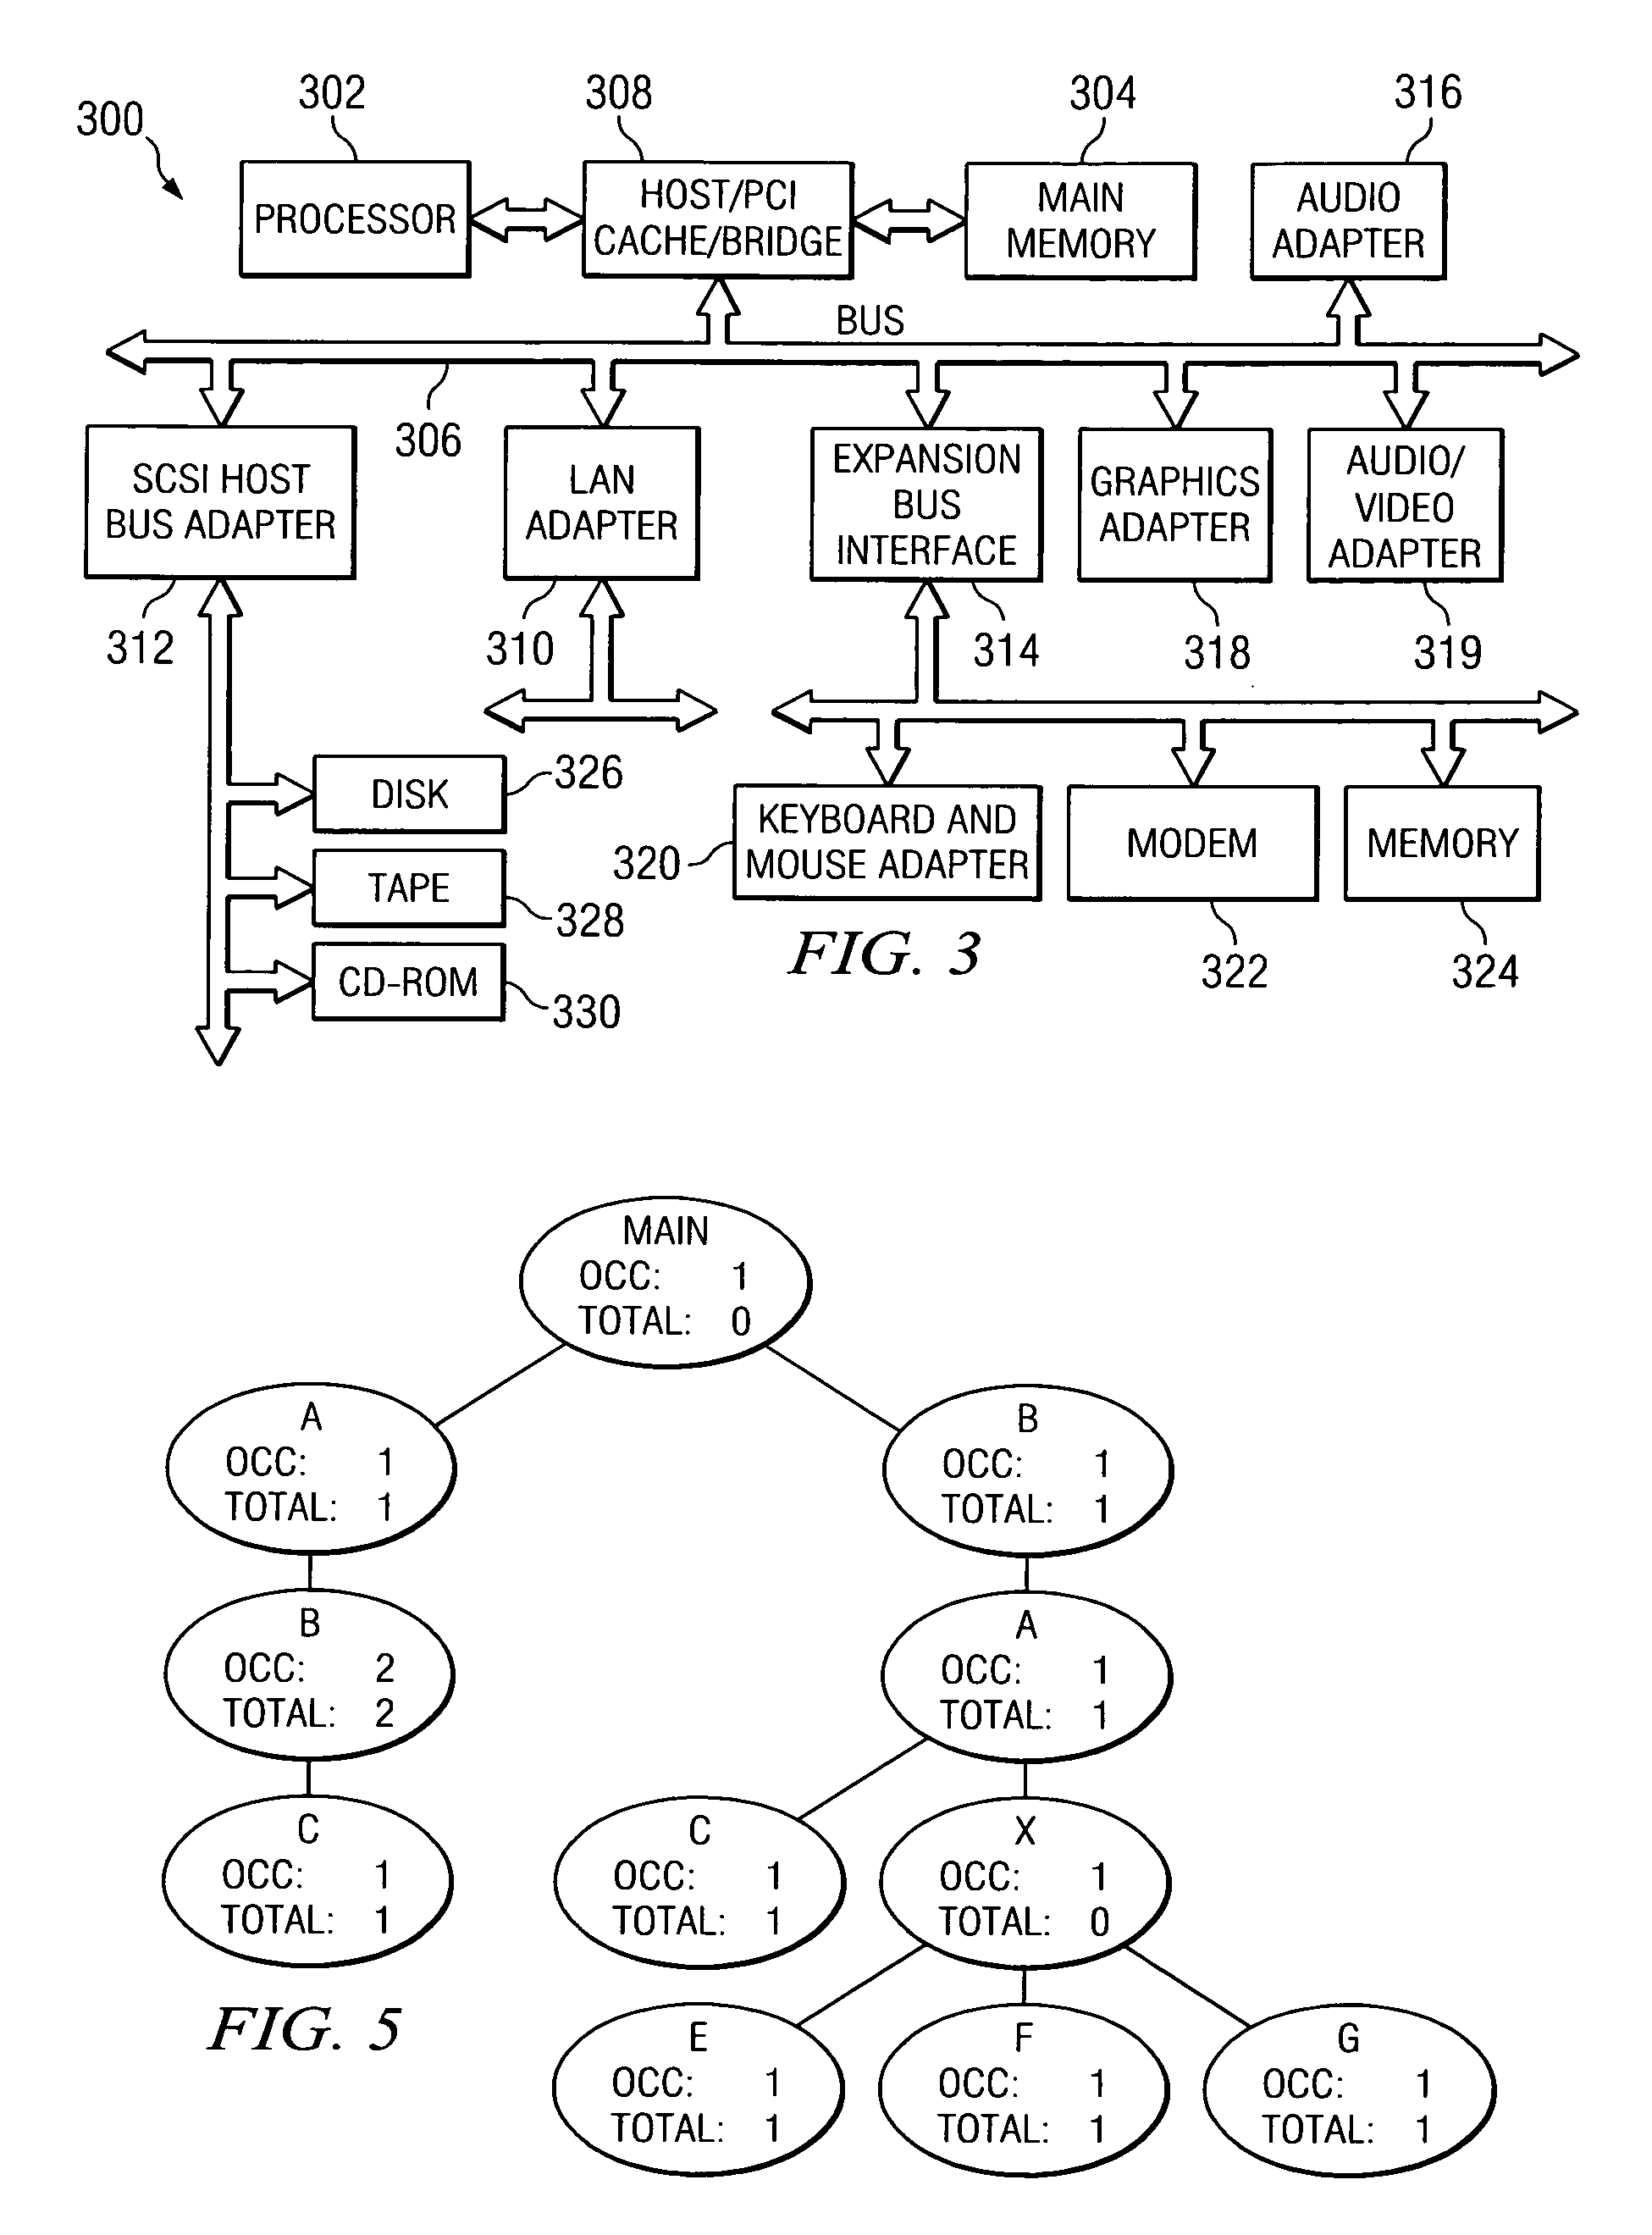 Method and apparatus for identifying differences in runs of a computer program due to code changes